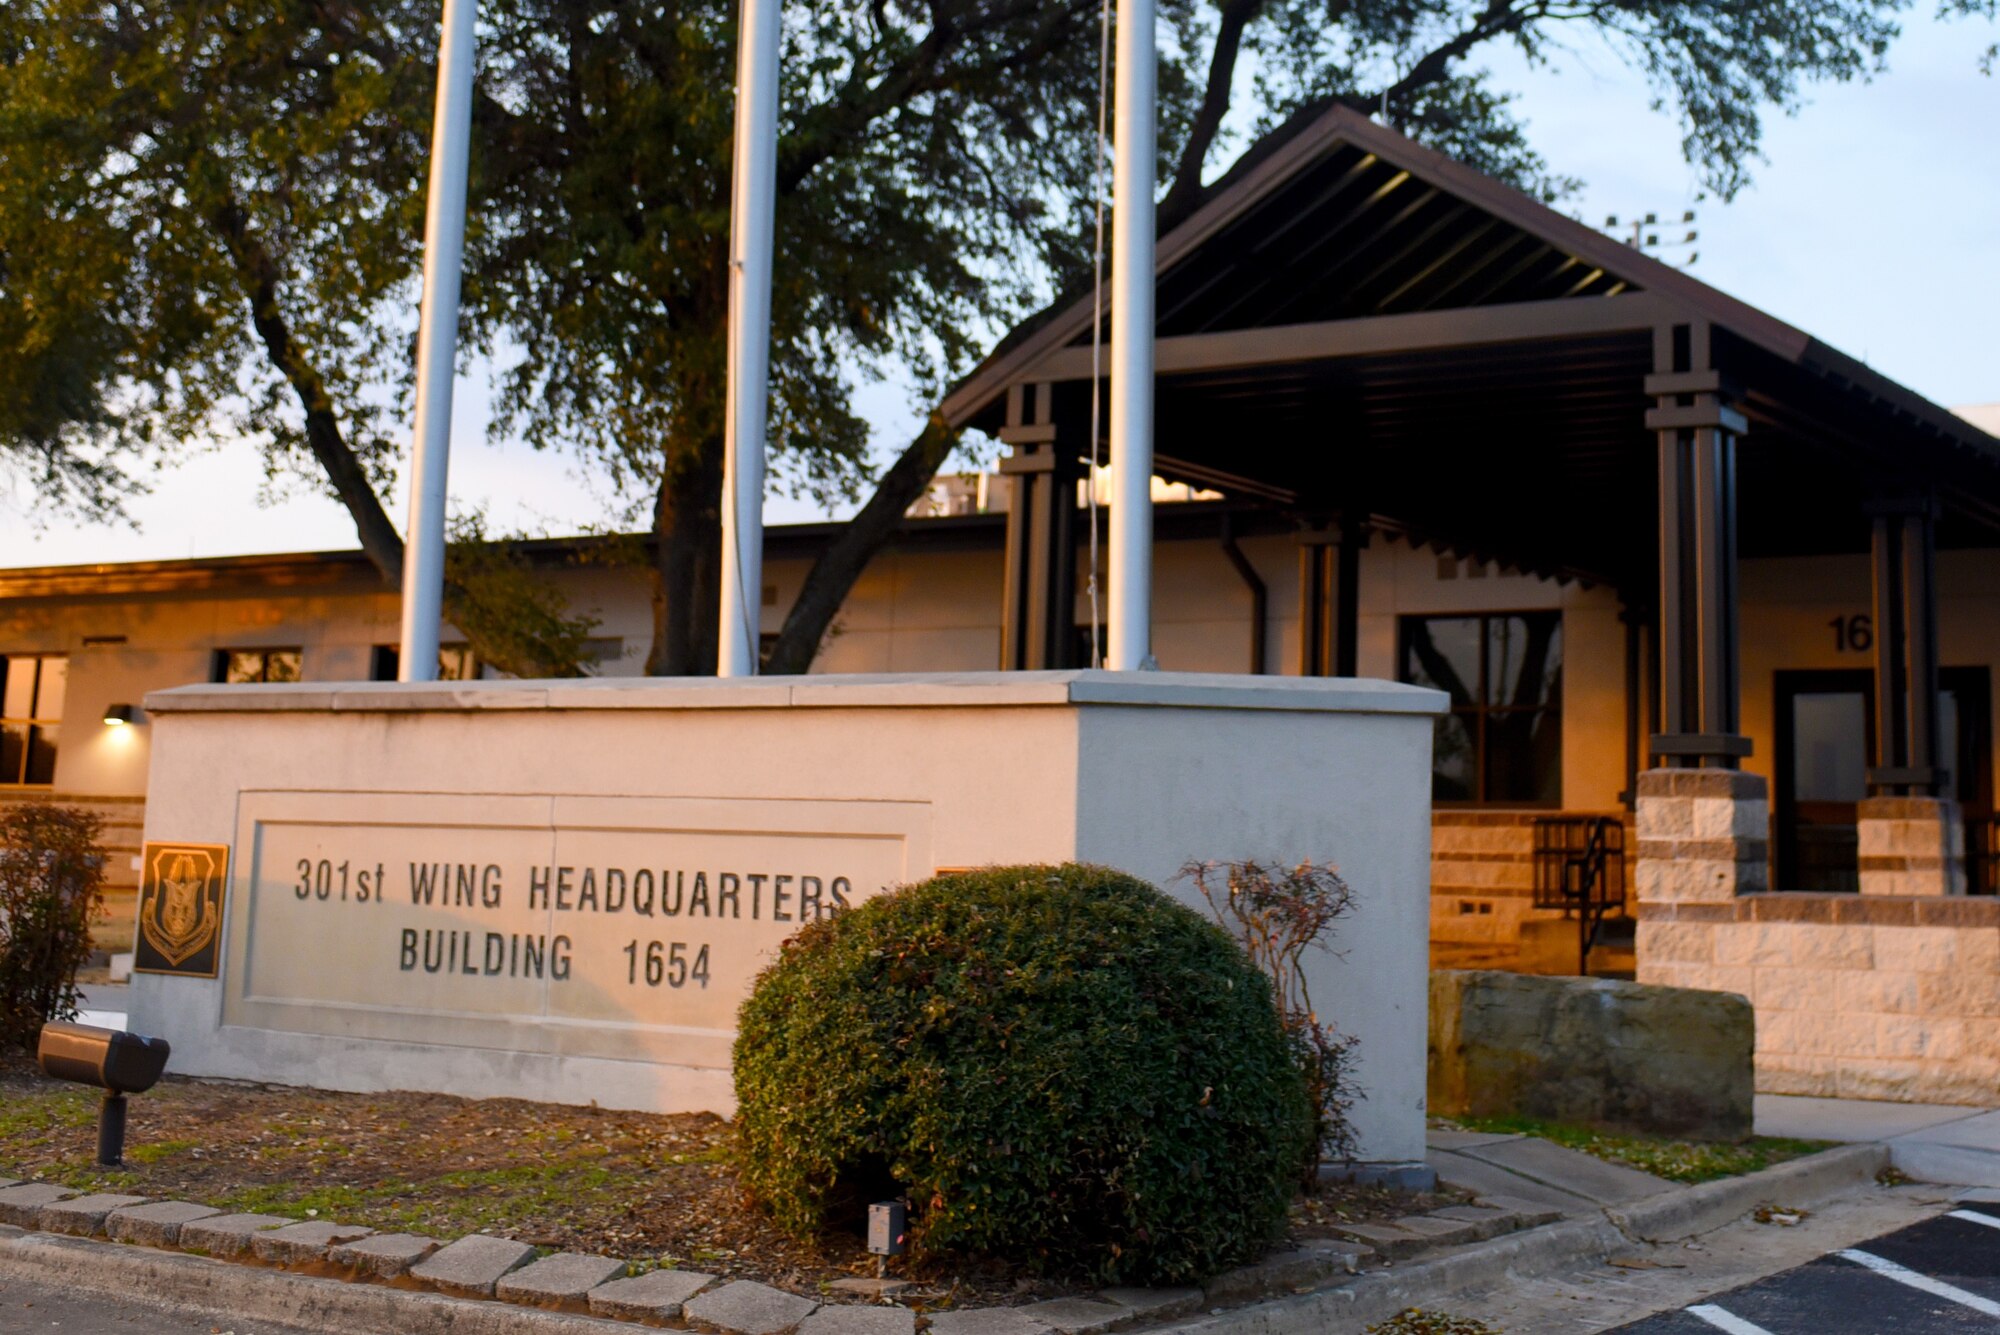 The 301st Fighter Wing reopens its headquarters at building 1654 at Naval Air Station Joint Reserve Base Fort Worth, Texas, March 6, 2022. The 301st Fighter Wing has completed renovations of its headquarters, building 1654, on Feb. 7, 2022. (U.S. Air Force photo by Staff Sgt. Randall Moose)